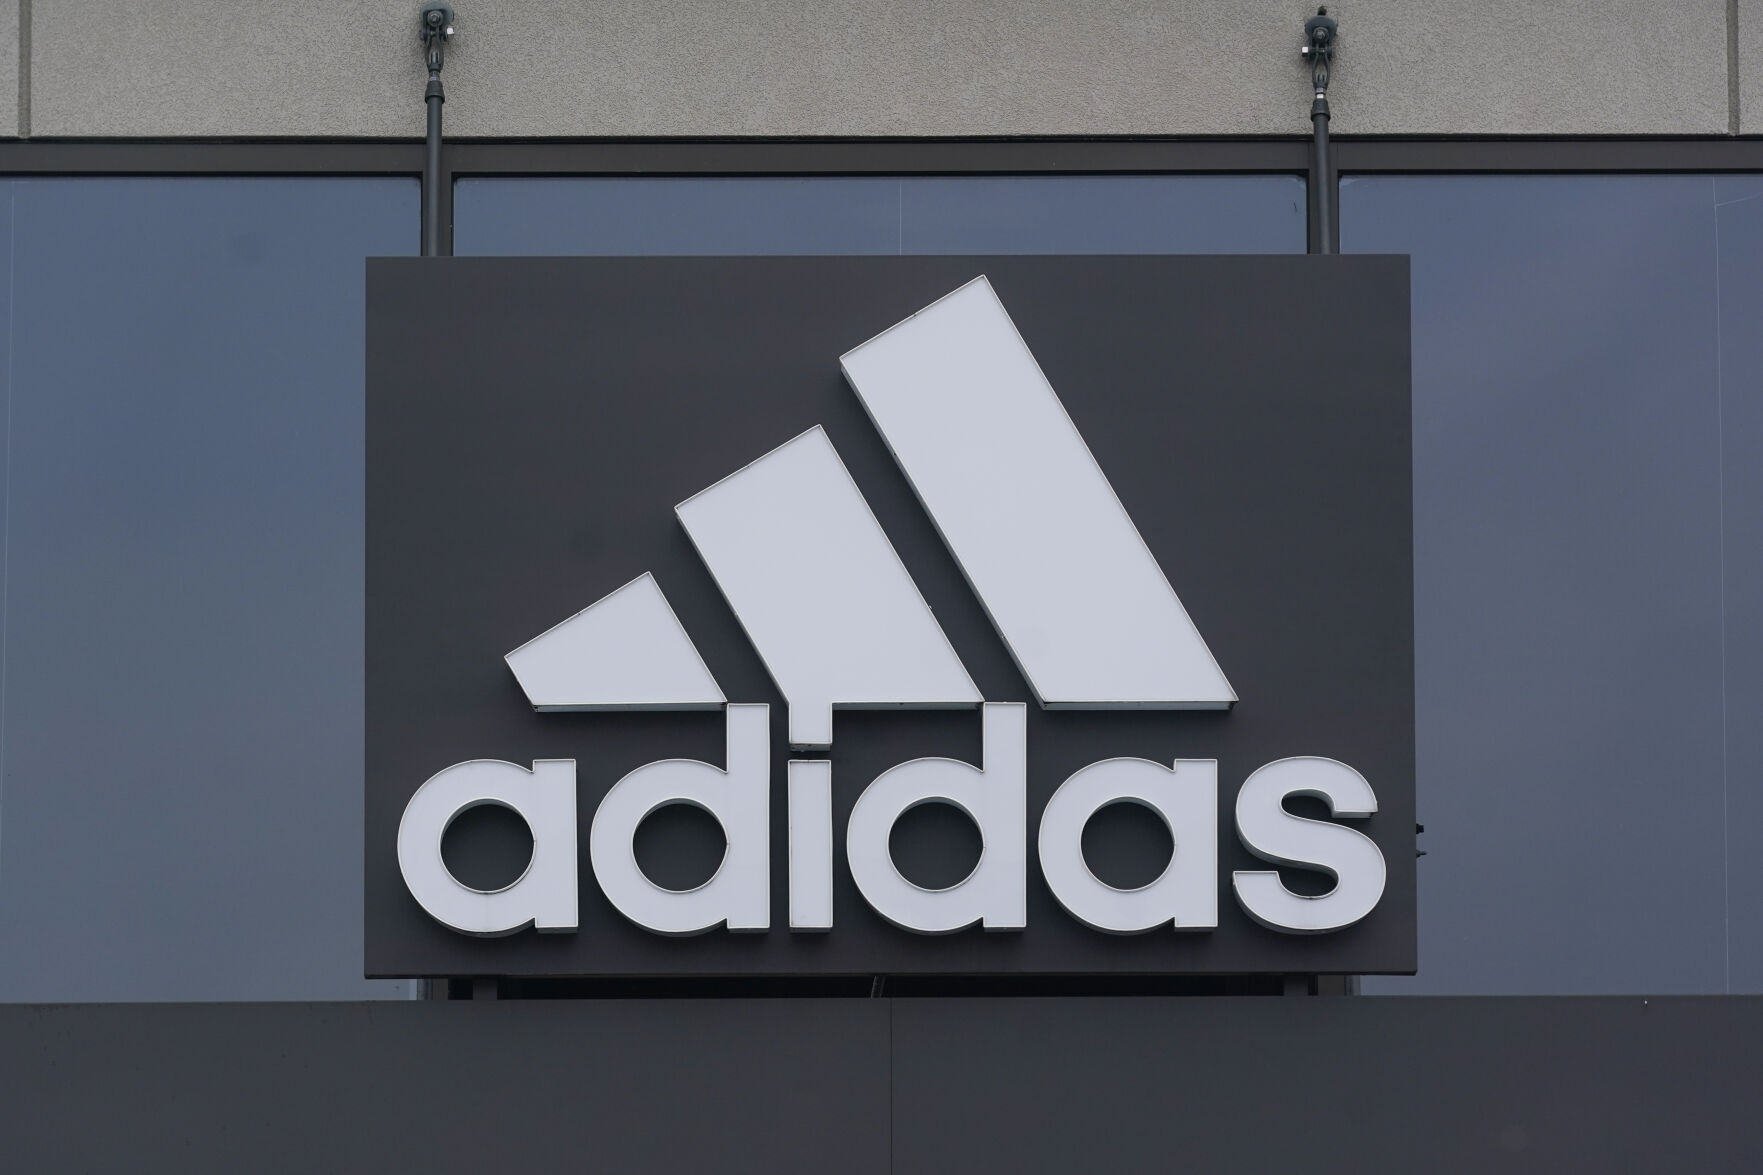 <p>A sign is displayed in front of an Adidas retail store in Paramus, N.J., Tuesday, Oct. 25, 2022. Adidas has ended its partnership with the rapper formerly known as Kanye West over his offensive and antisemitic remarks, the latest company to cut ties with Ye and a decision that the German sportswear company said would hit its bottom line. (AP Photo/Seth Wenig)</p>   PHOTO CREDIT: Seth Wenig 